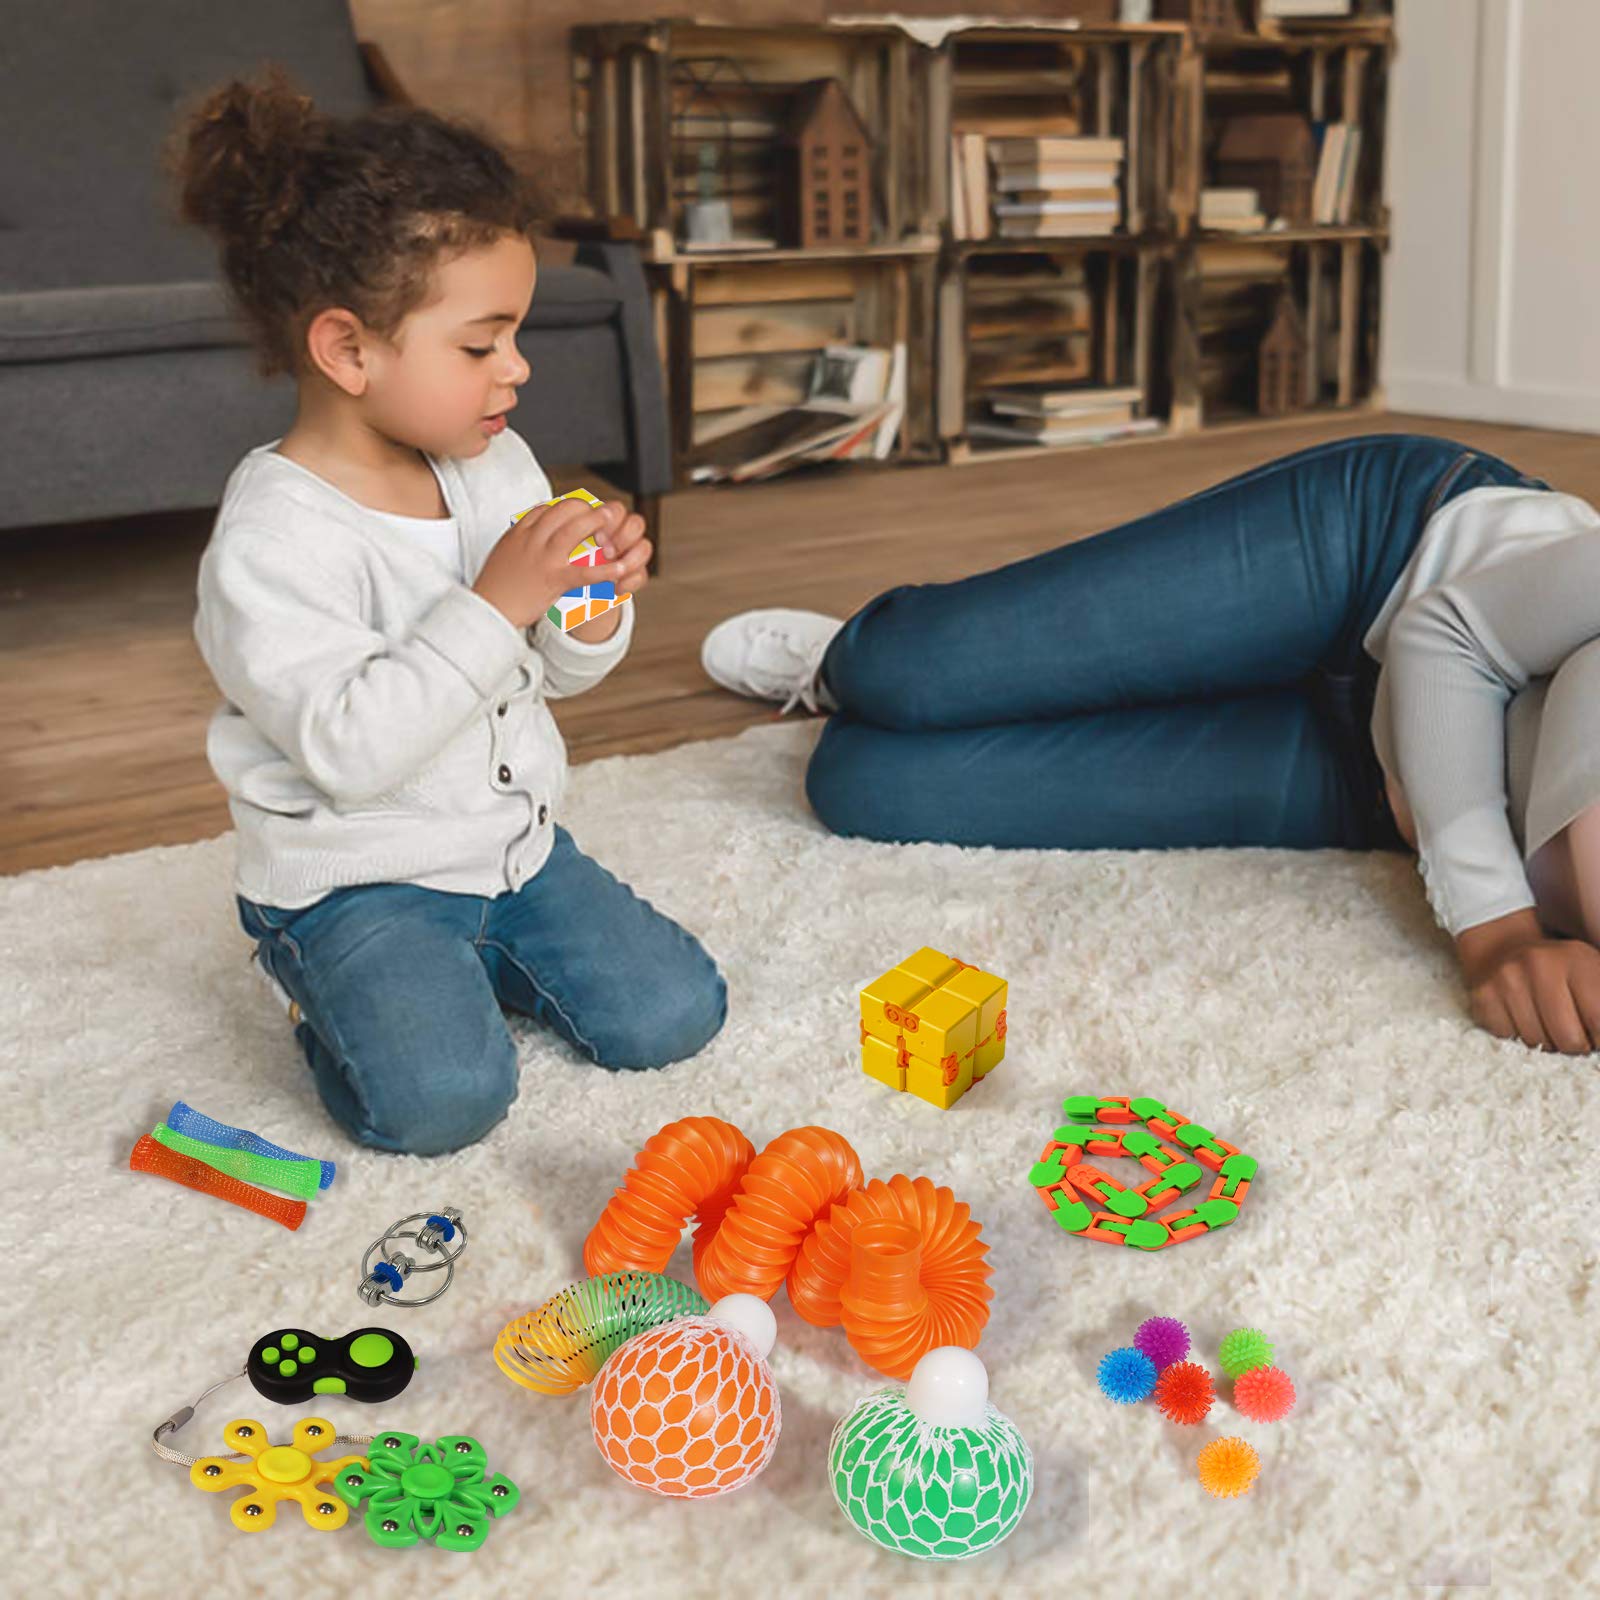 Kidcia Fidget Toys, 35 PCS Sensory Toys for Adults / Kids / ADHD / Autistic / ADD / OCD to Release Anxiety / Autism with Marble Mesh & Liquid Motion Timer, Gifts for Birthday / Classroom Reward